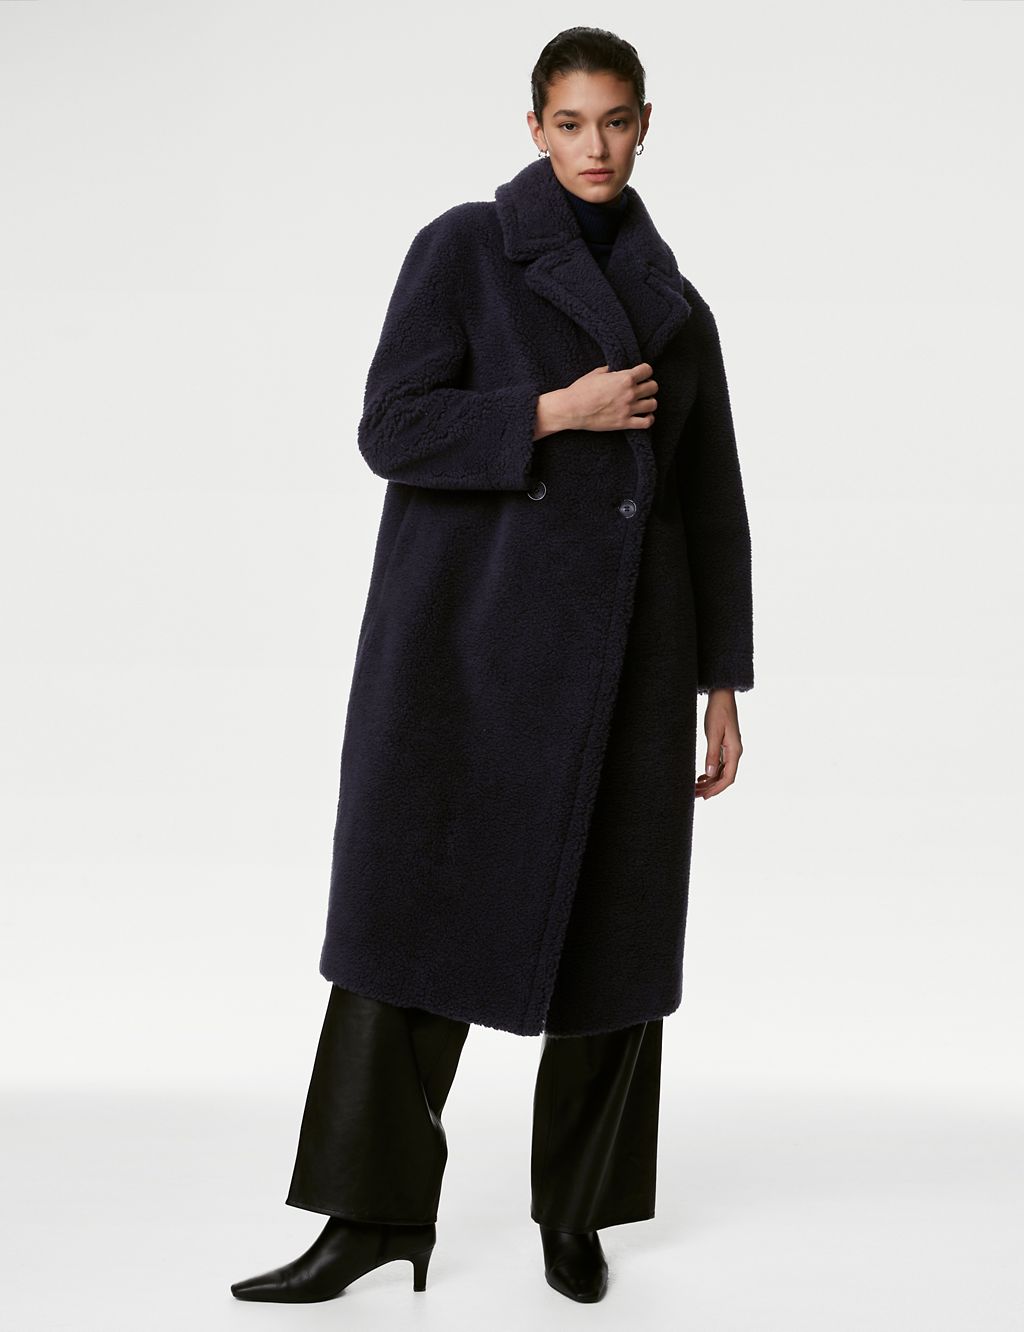 Borg Collared Coat with Wool | Autograph | M&S